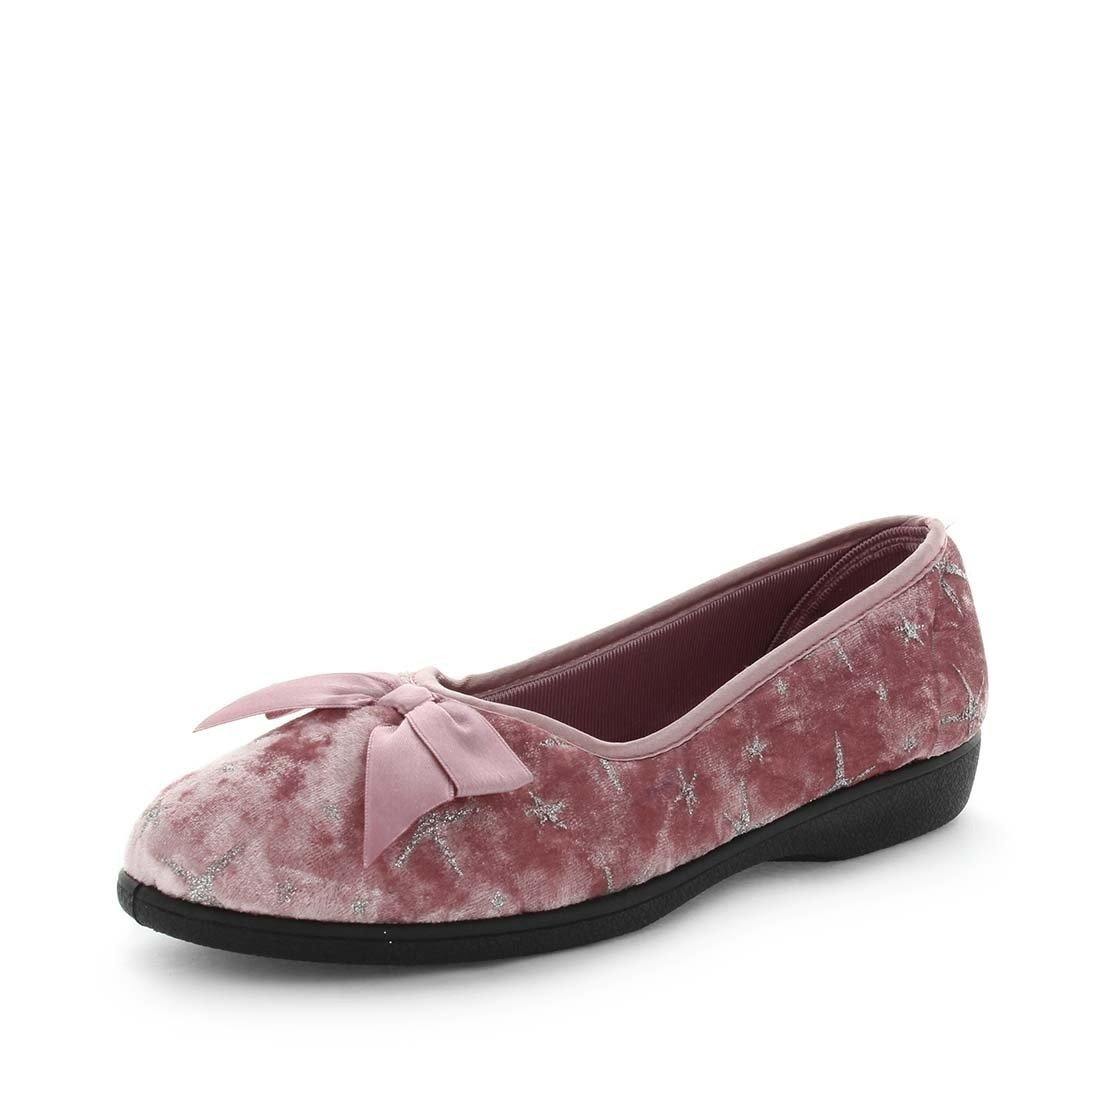 Womens slippers - emilyn by panda slippers. A pink printed velour court and bow slipper with a quilted lining and sock for a soft to touch feel.